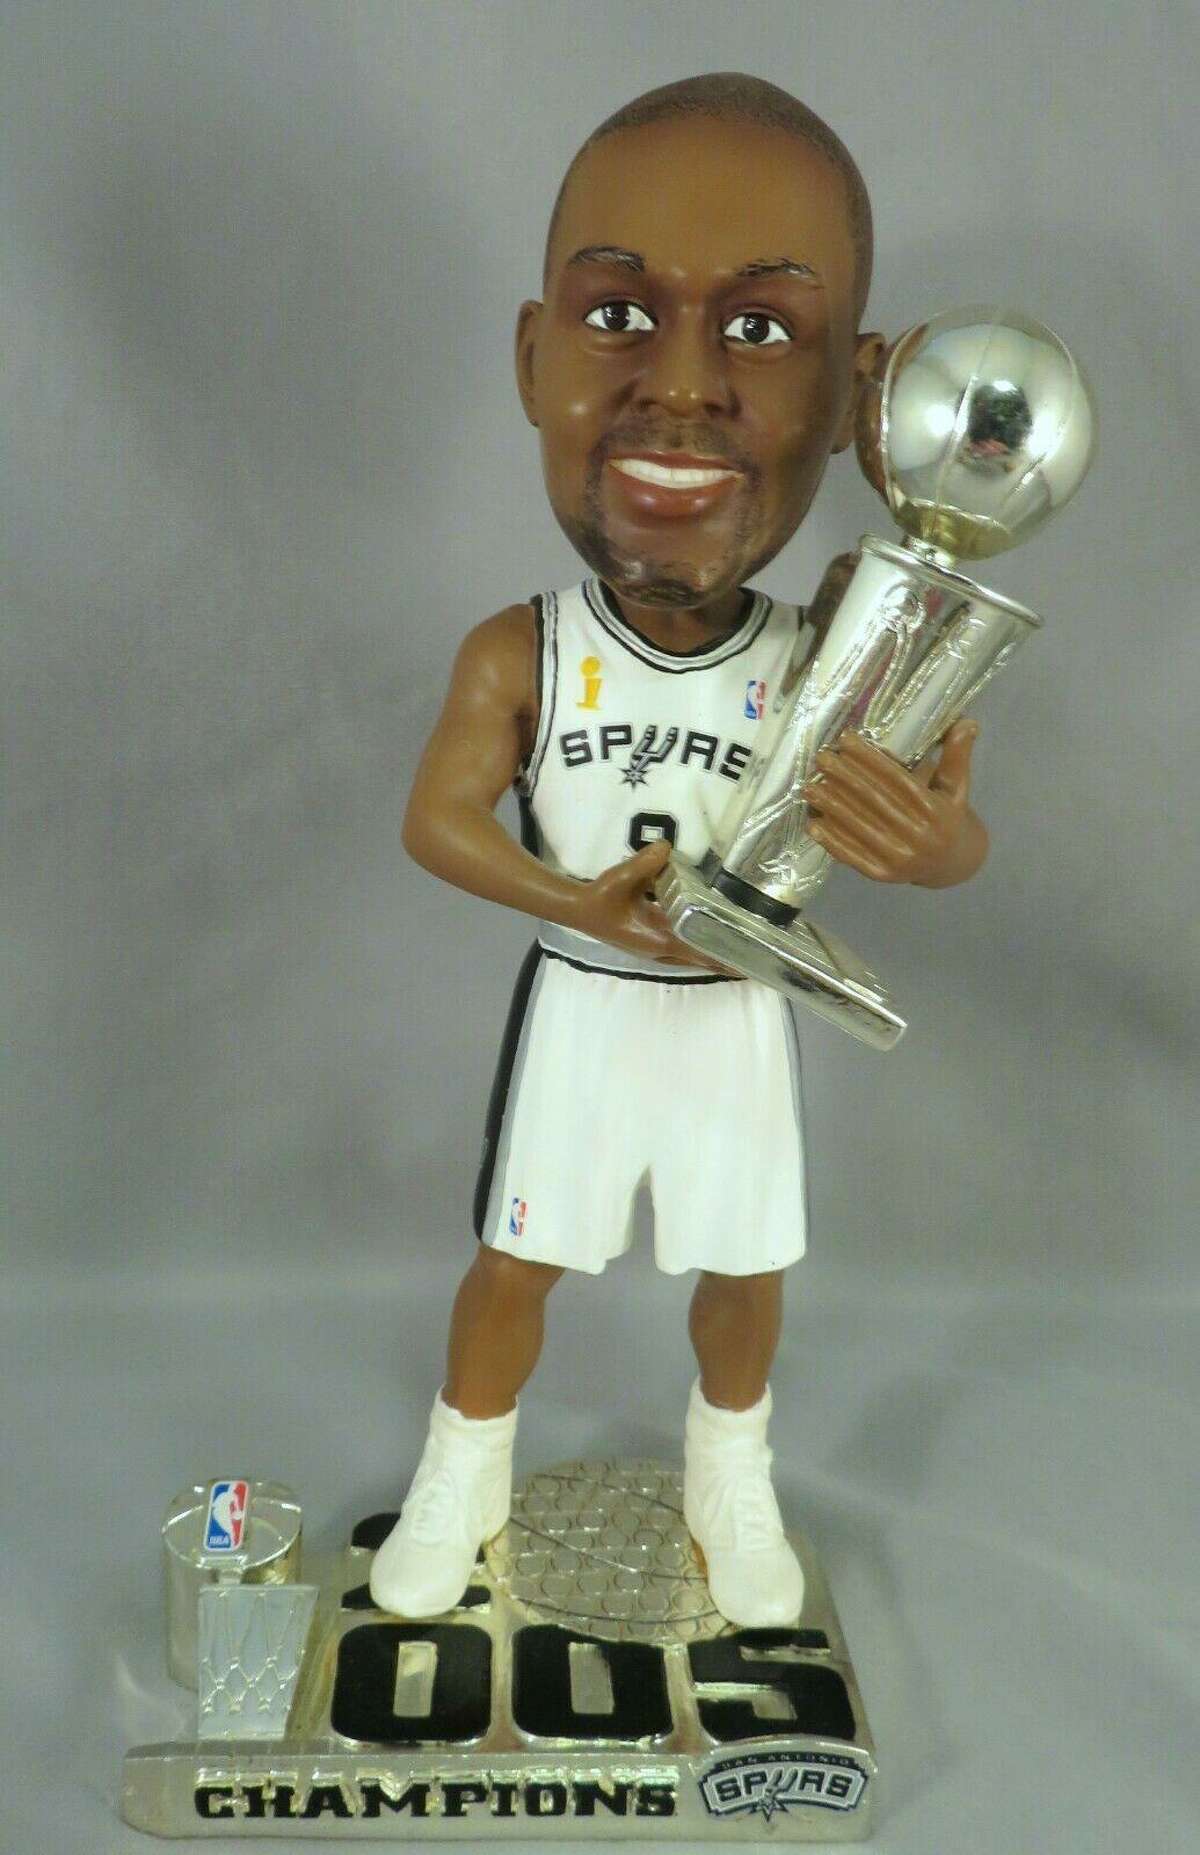 In the pasat year on eBay, a 2005 NBA Champions Legends of the Court bobblehead of Tony Parker sold for $150.